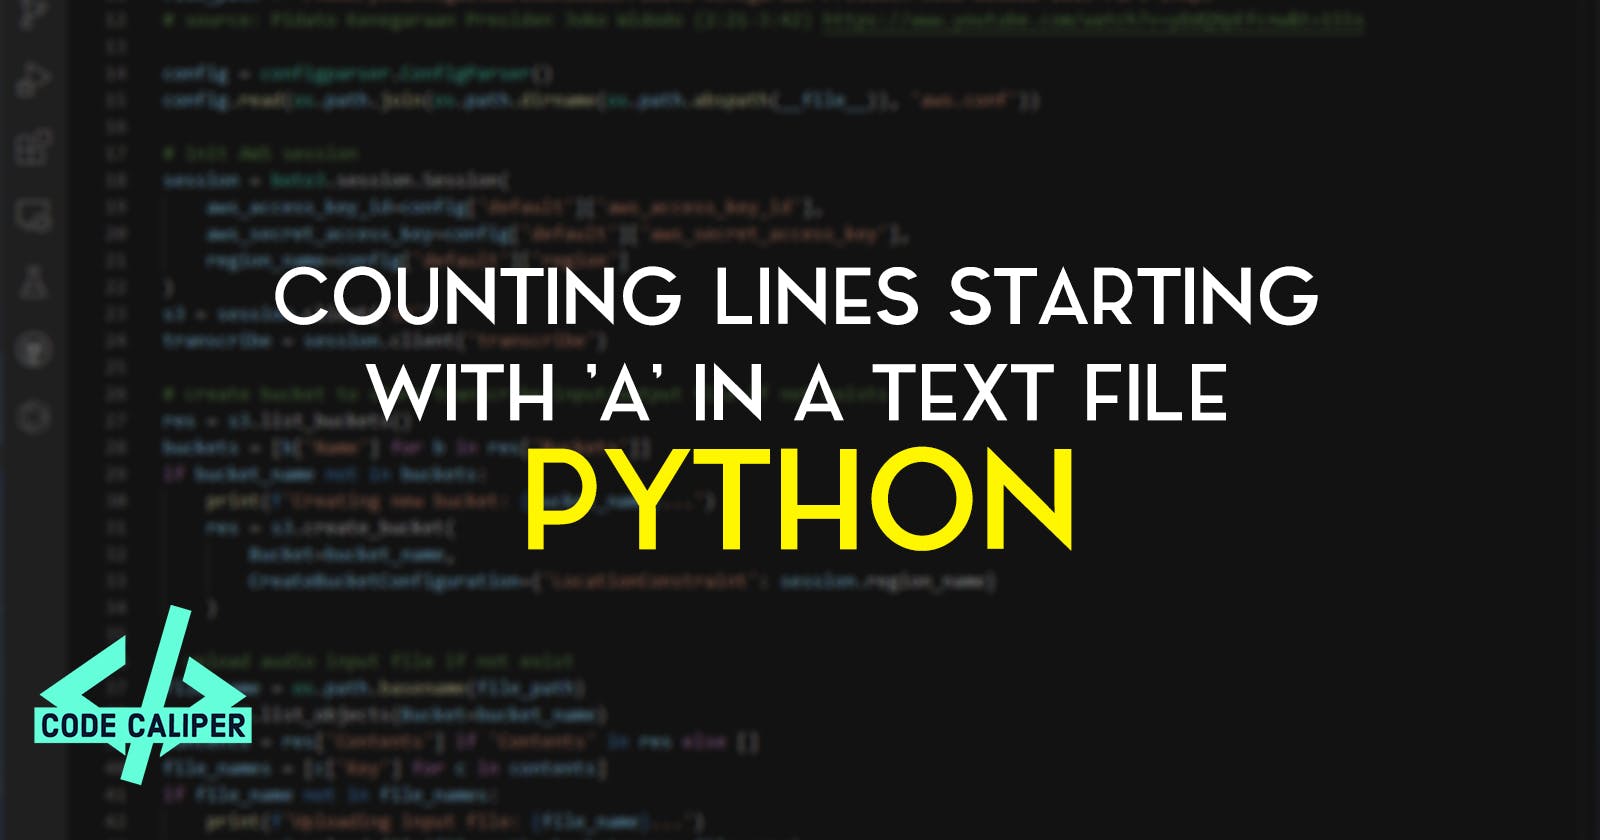 Counting Lines Starting with 'a' in a Text File using Python